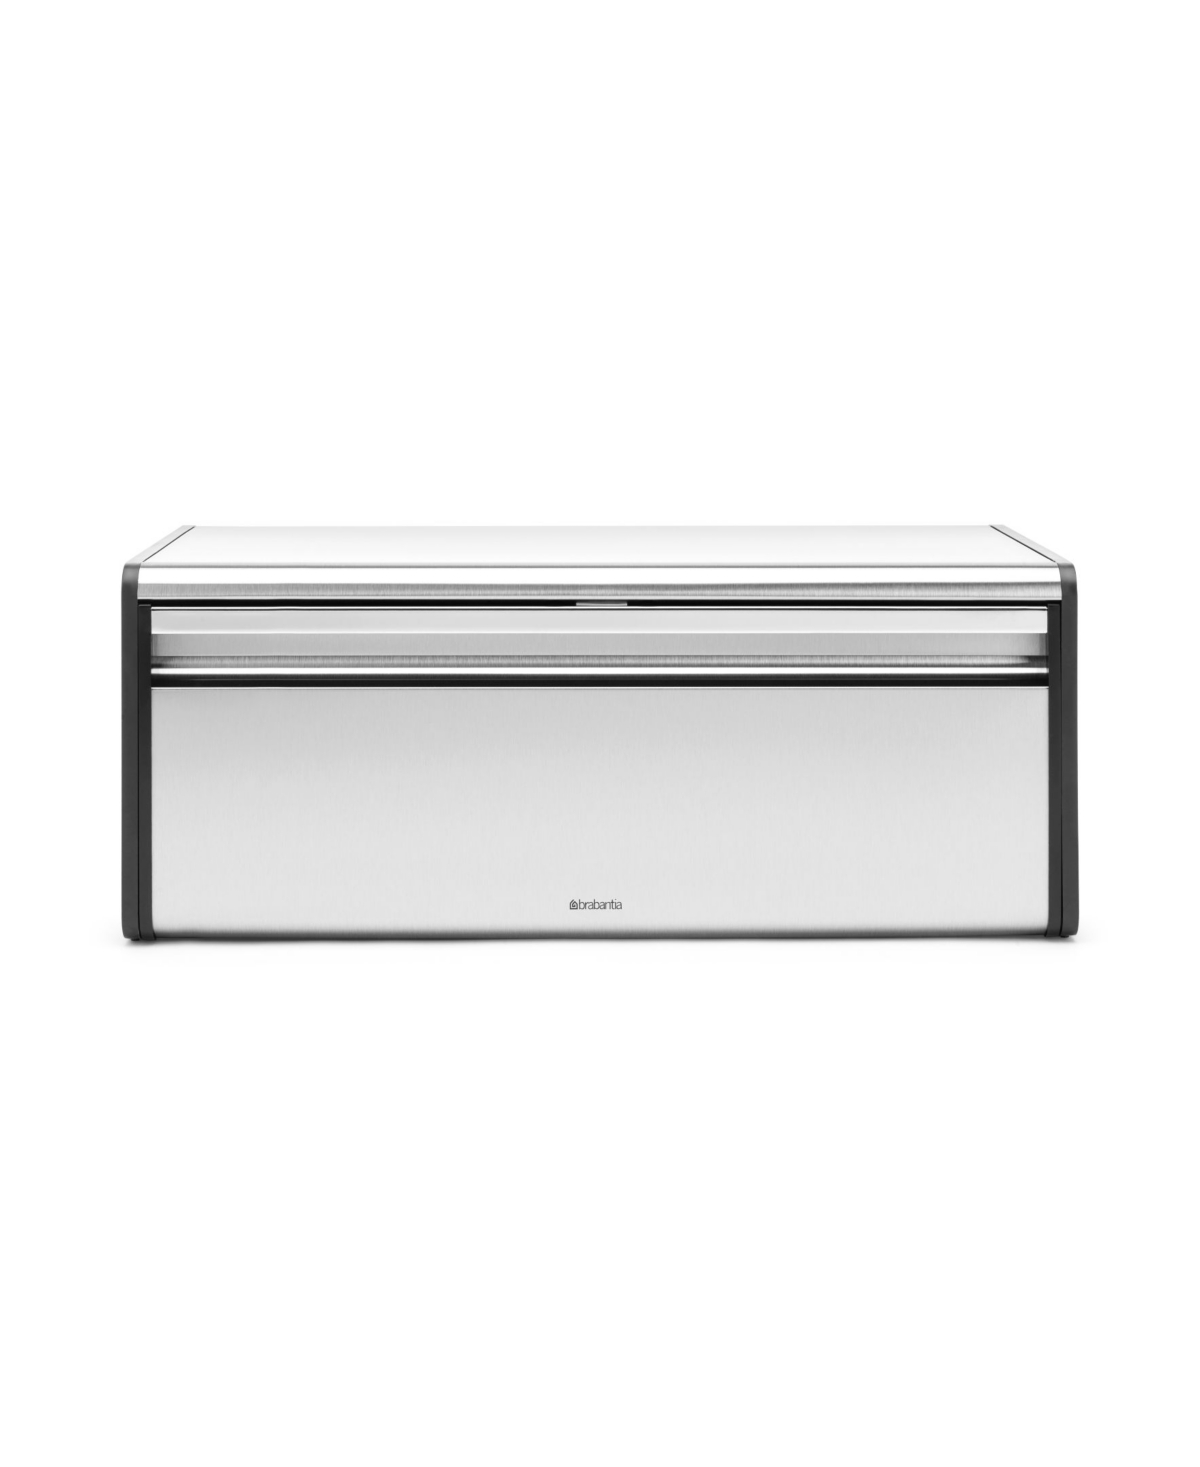 Brabantia Large Fall Front Bread Box In No Color